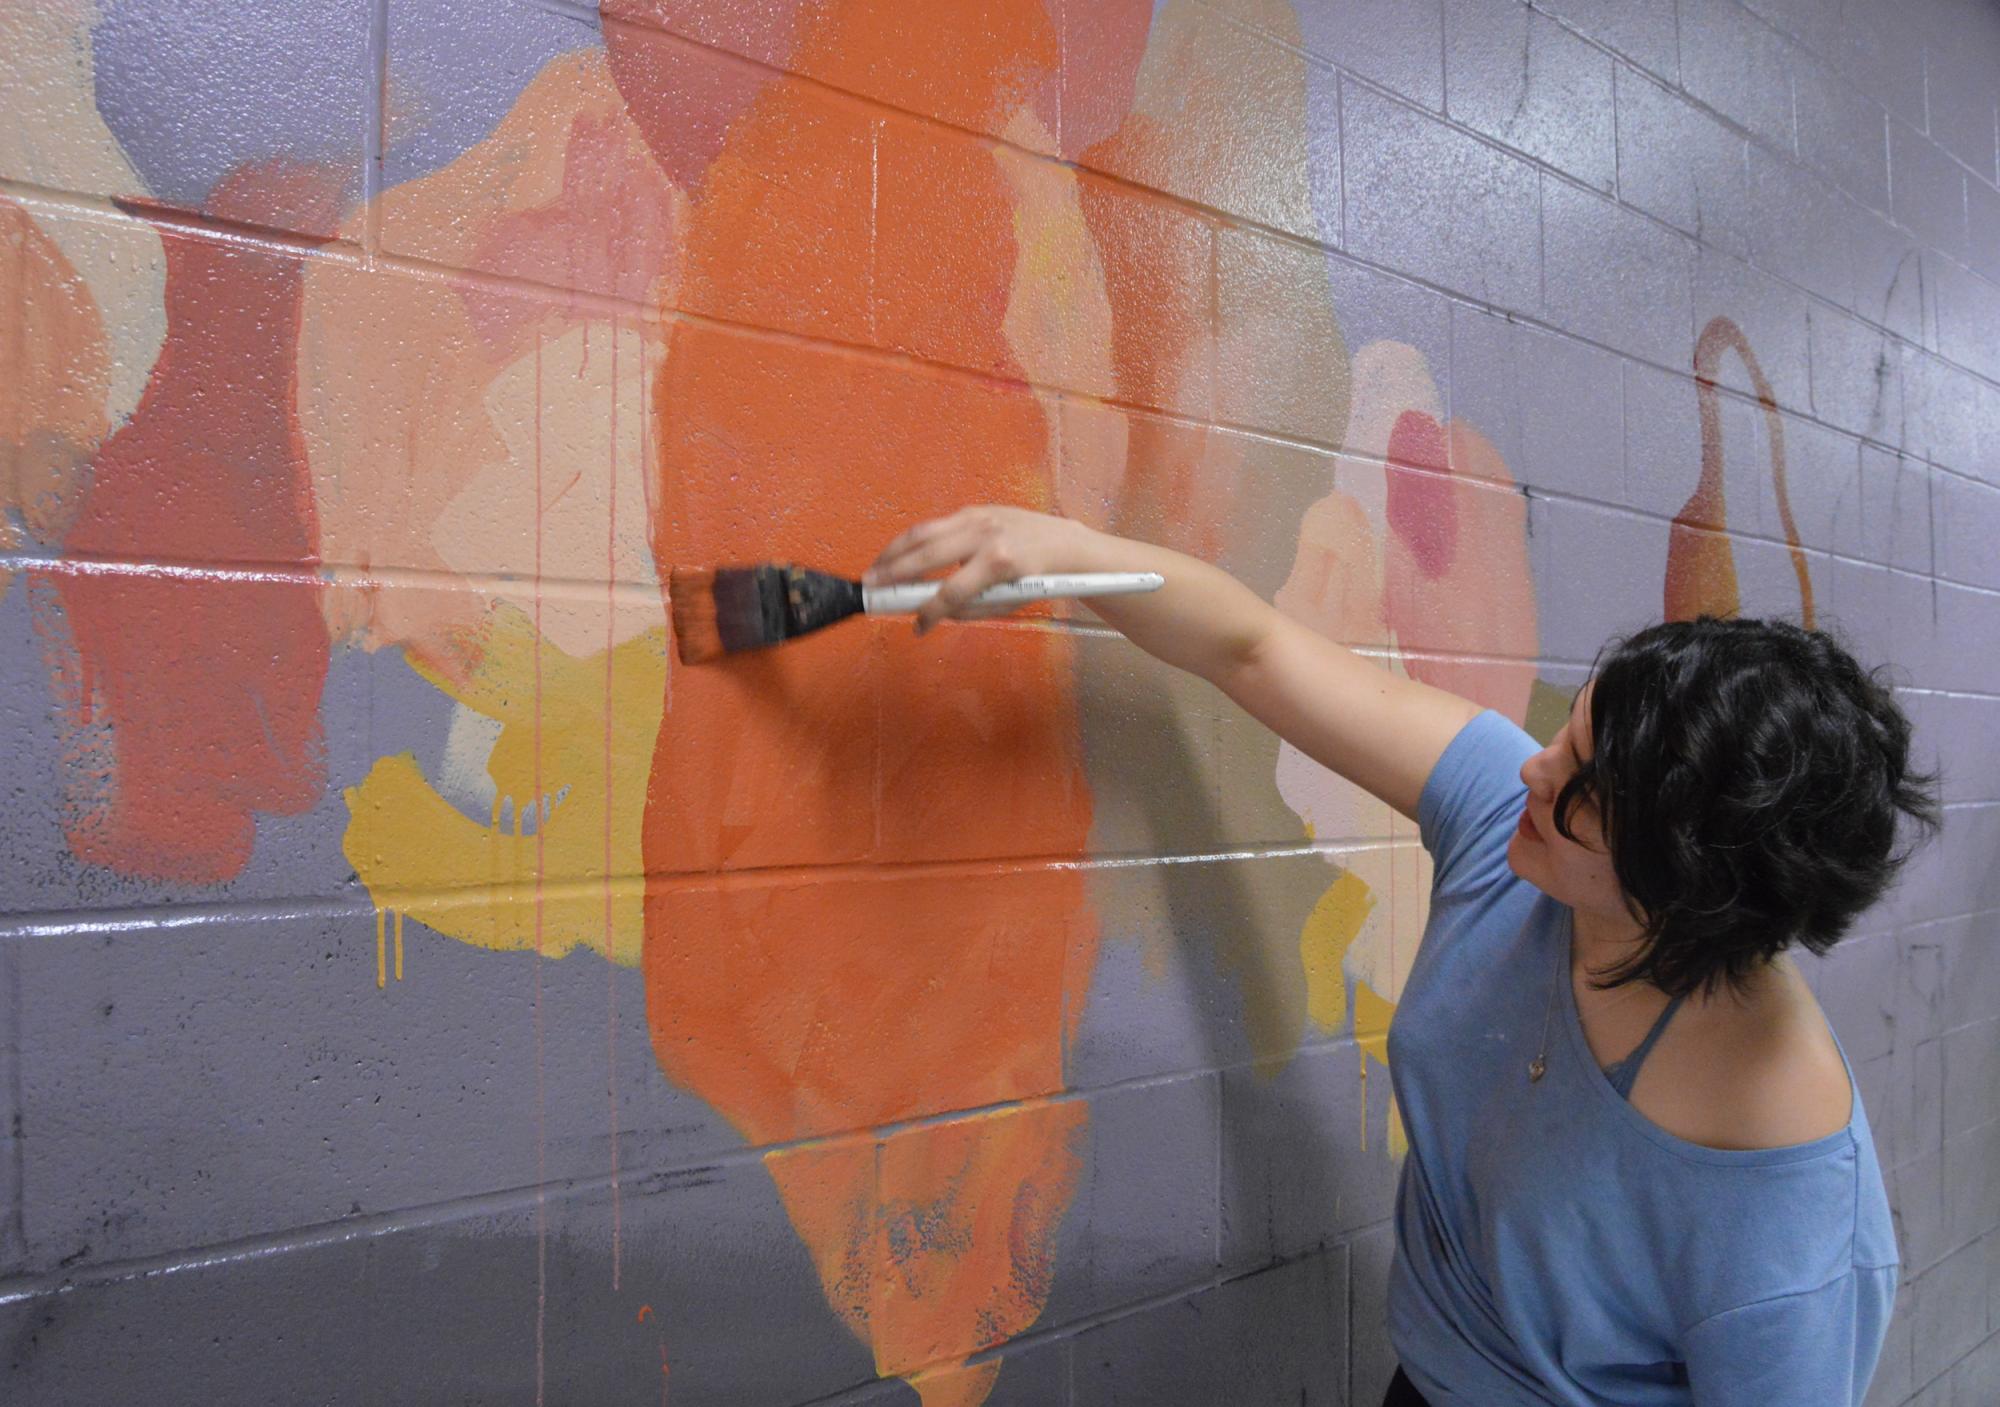 Victoria paints a mural on a wall in the Butler School of Music